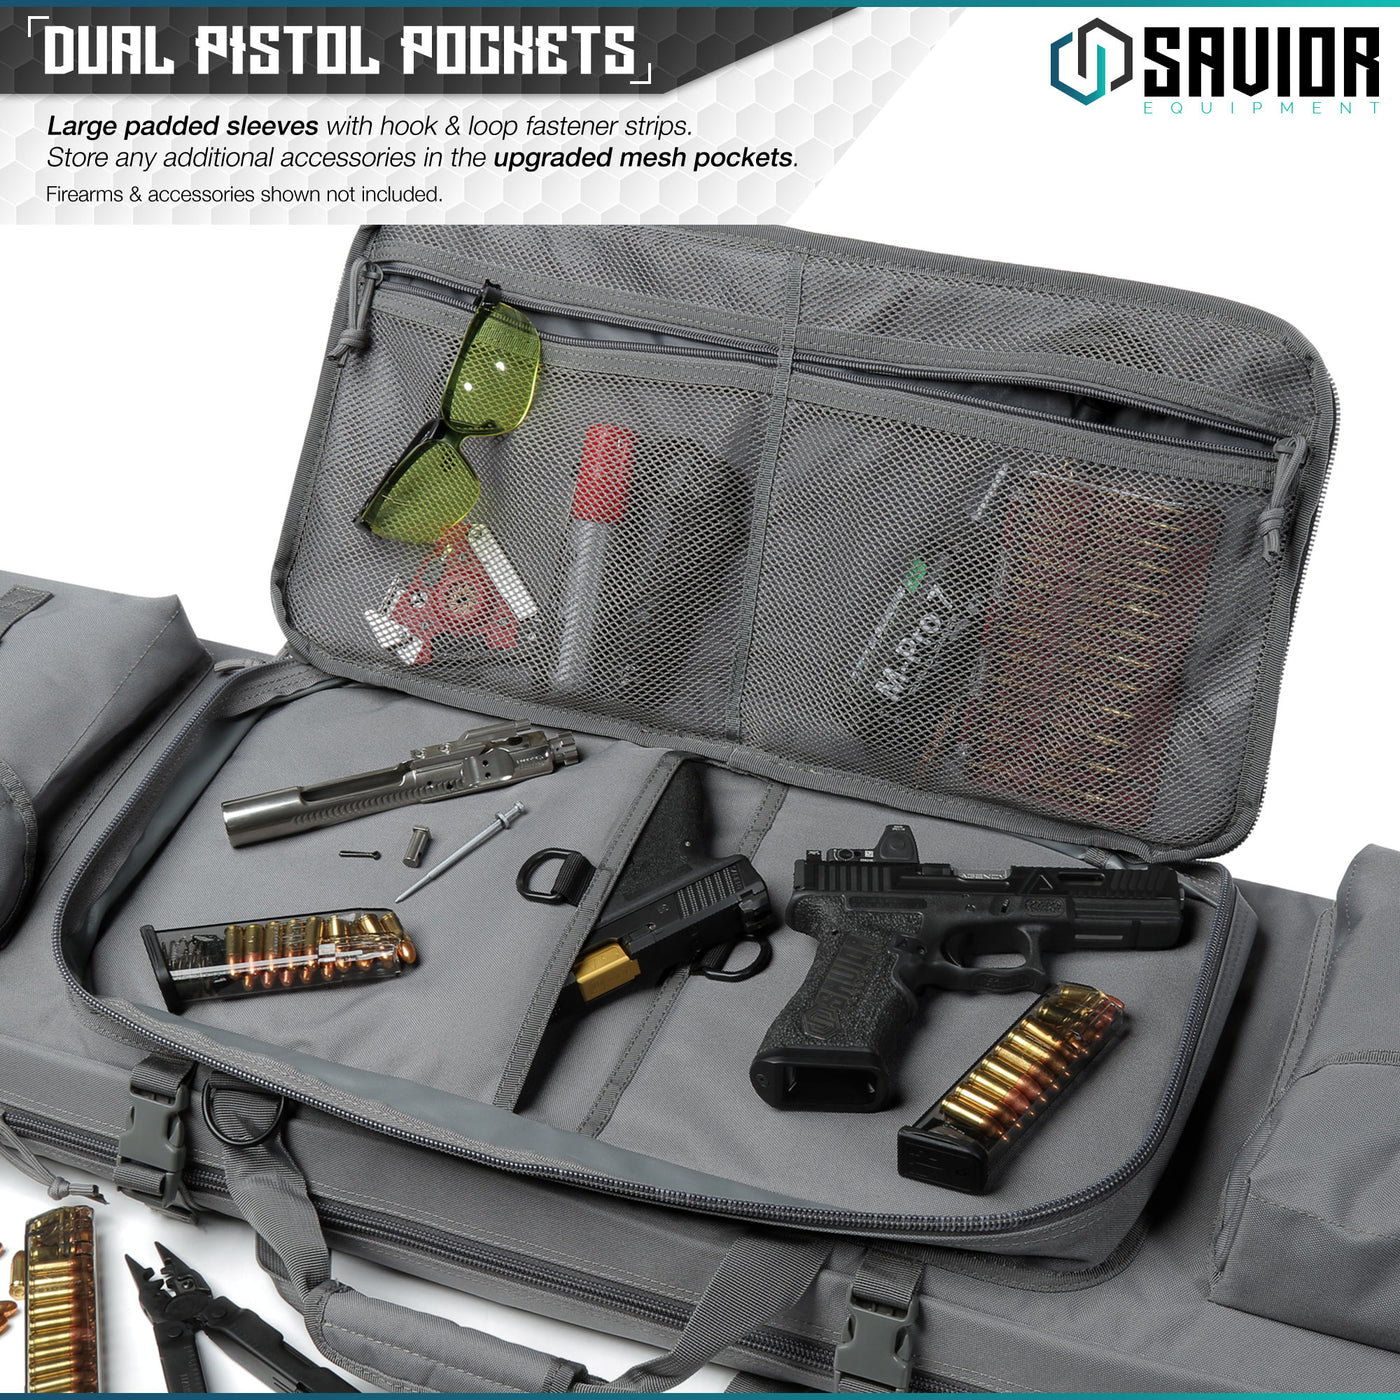 Dual Pistol Pockets - Large padded sleeves with hook & loop fastener strips. Store any additional accessories in the upgraded mesh pockets. Firearm & accessories shown not included.